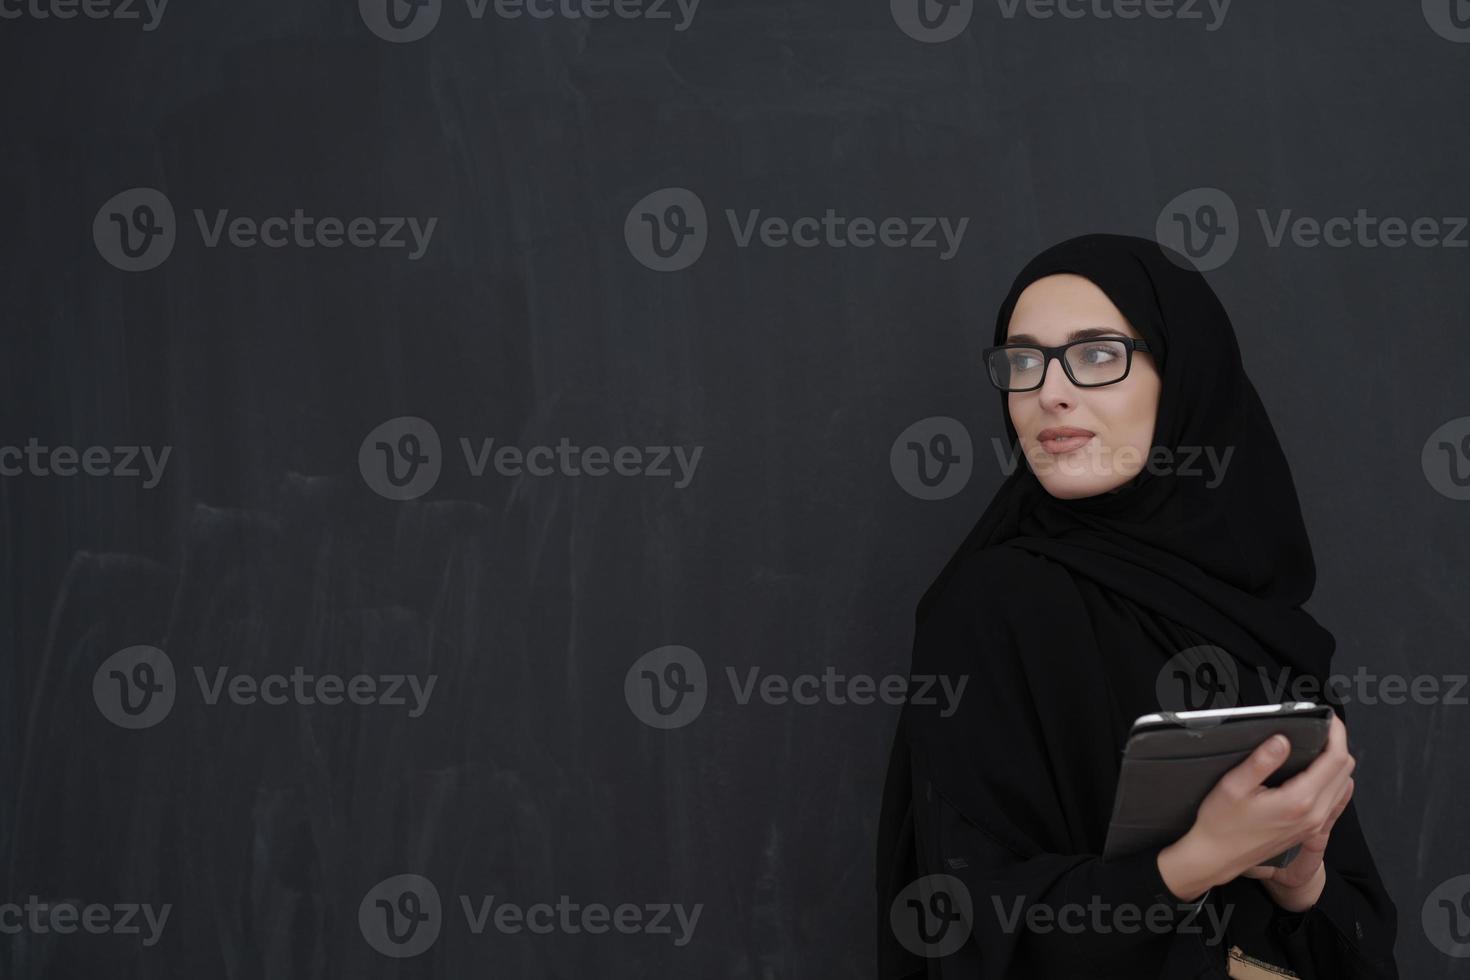 Young Arab businesswoman in traditional clothes or abaya holding tablet computer photo